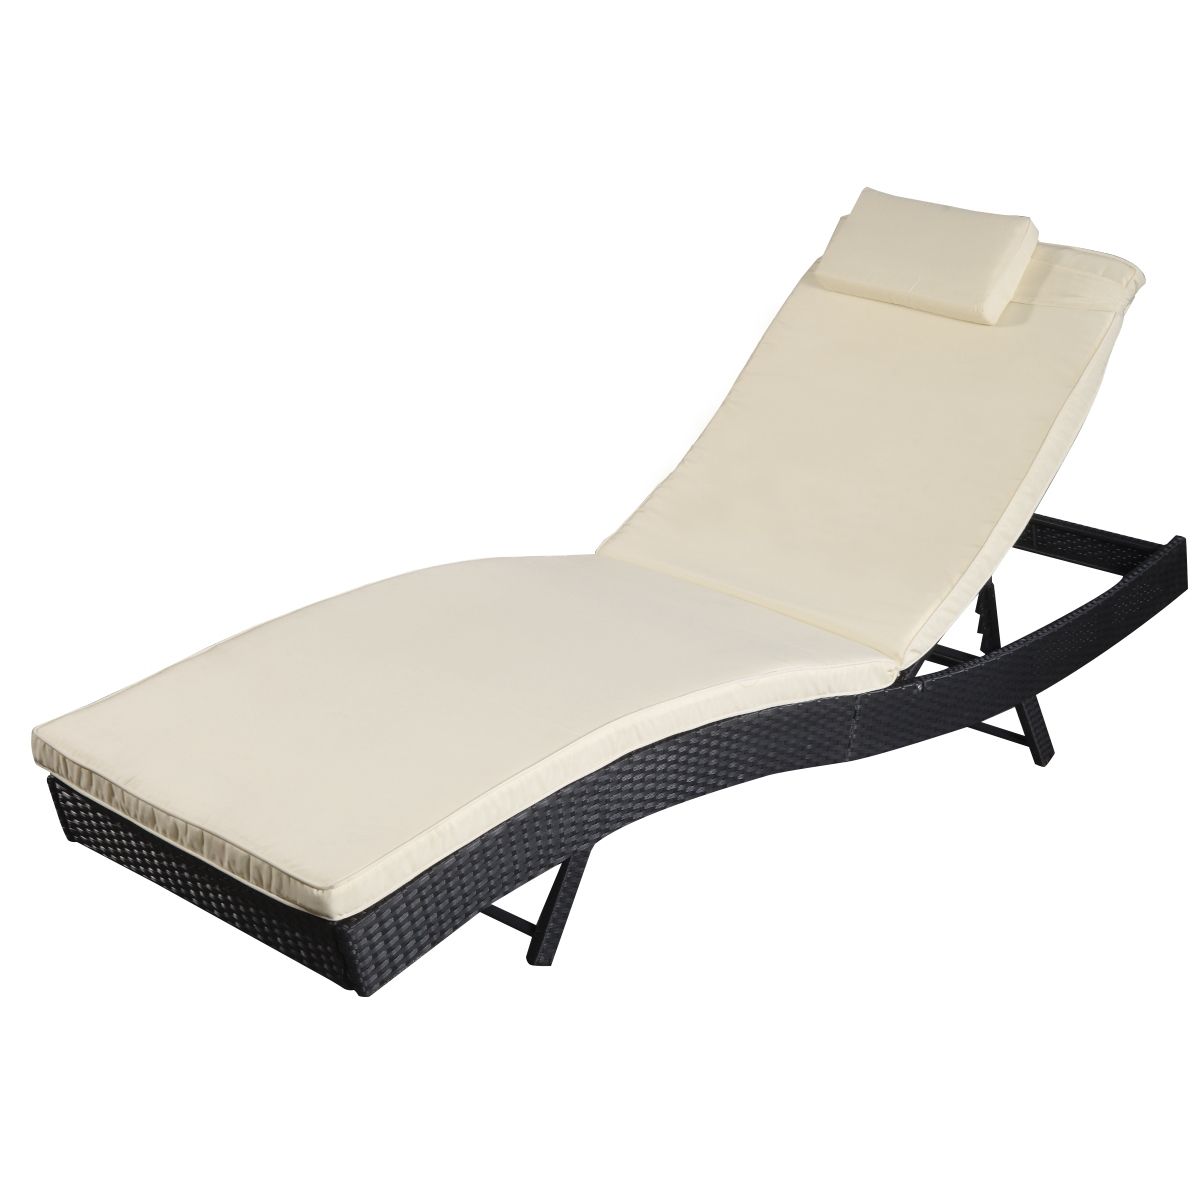 Costway Adjustable Pool Chaise Lounge Chair Outdoor Patio Throughout Popular Portable Outdoor Chaise Lounge Chairs (View 8 of 15)